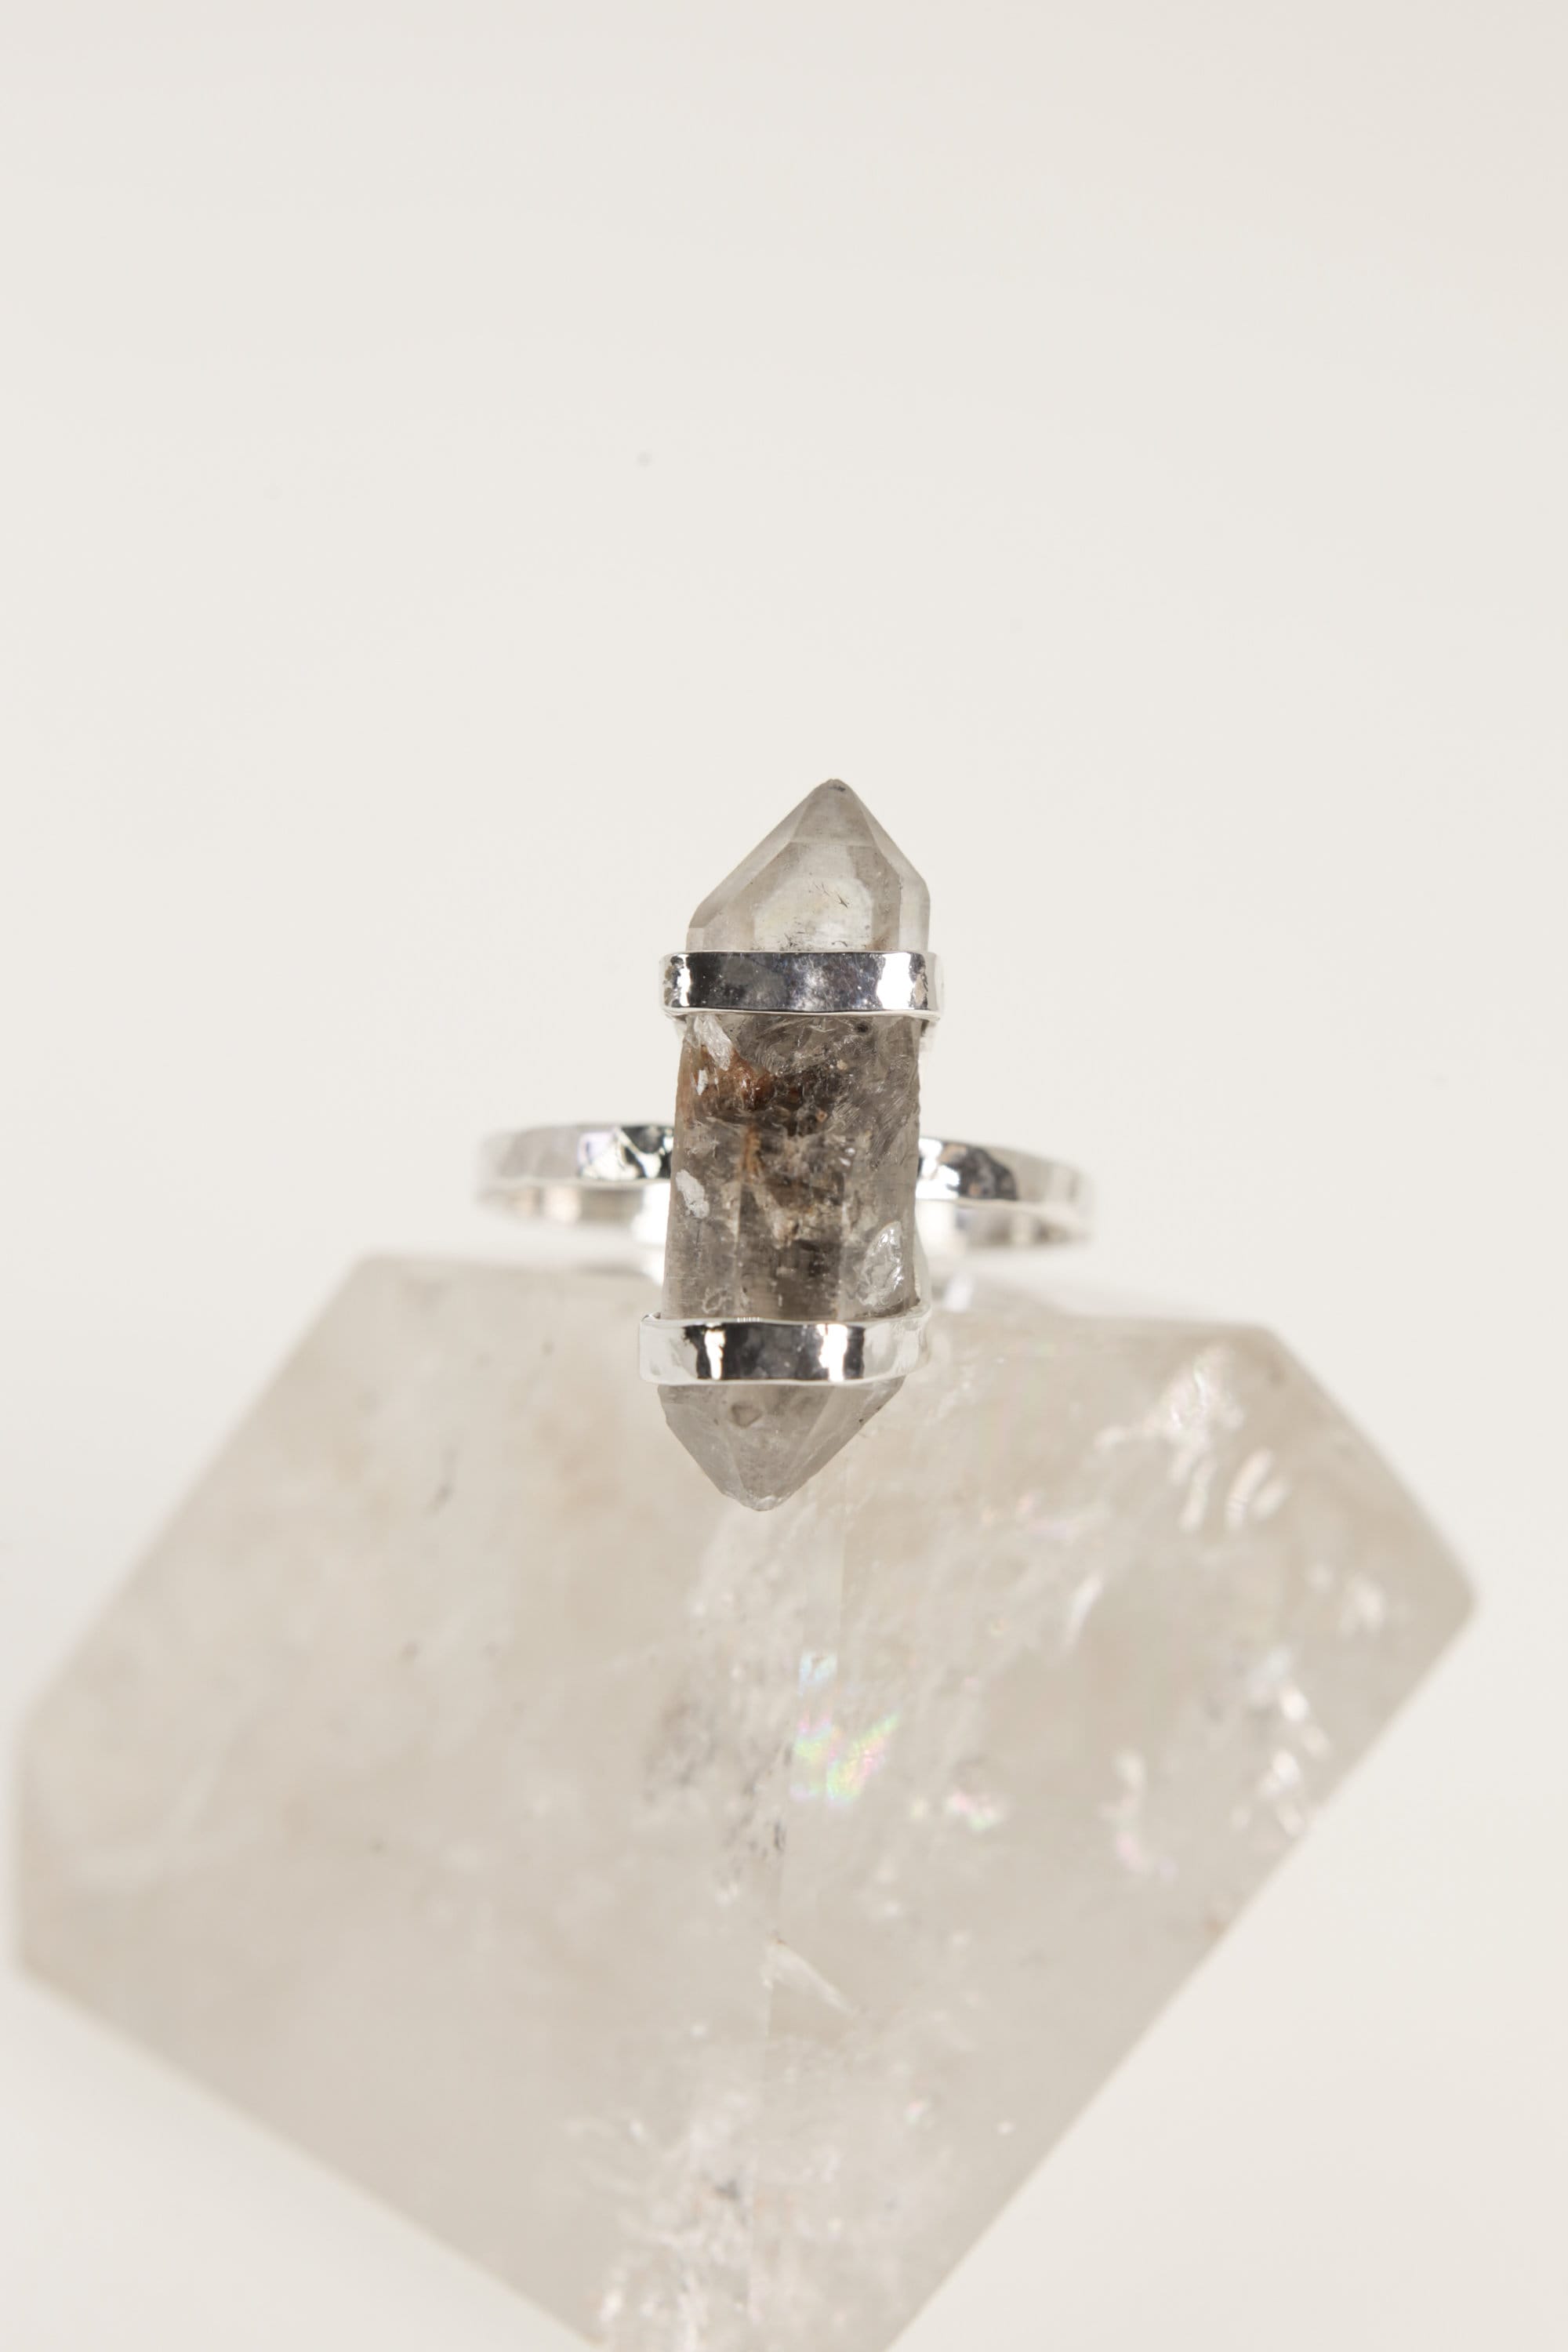 Tibetan Tranquility Double-Terminated Inclusion Quartz Ring-Hammered & Shiny Finish - Sterling Silver Ring - Size 9 1/2 US